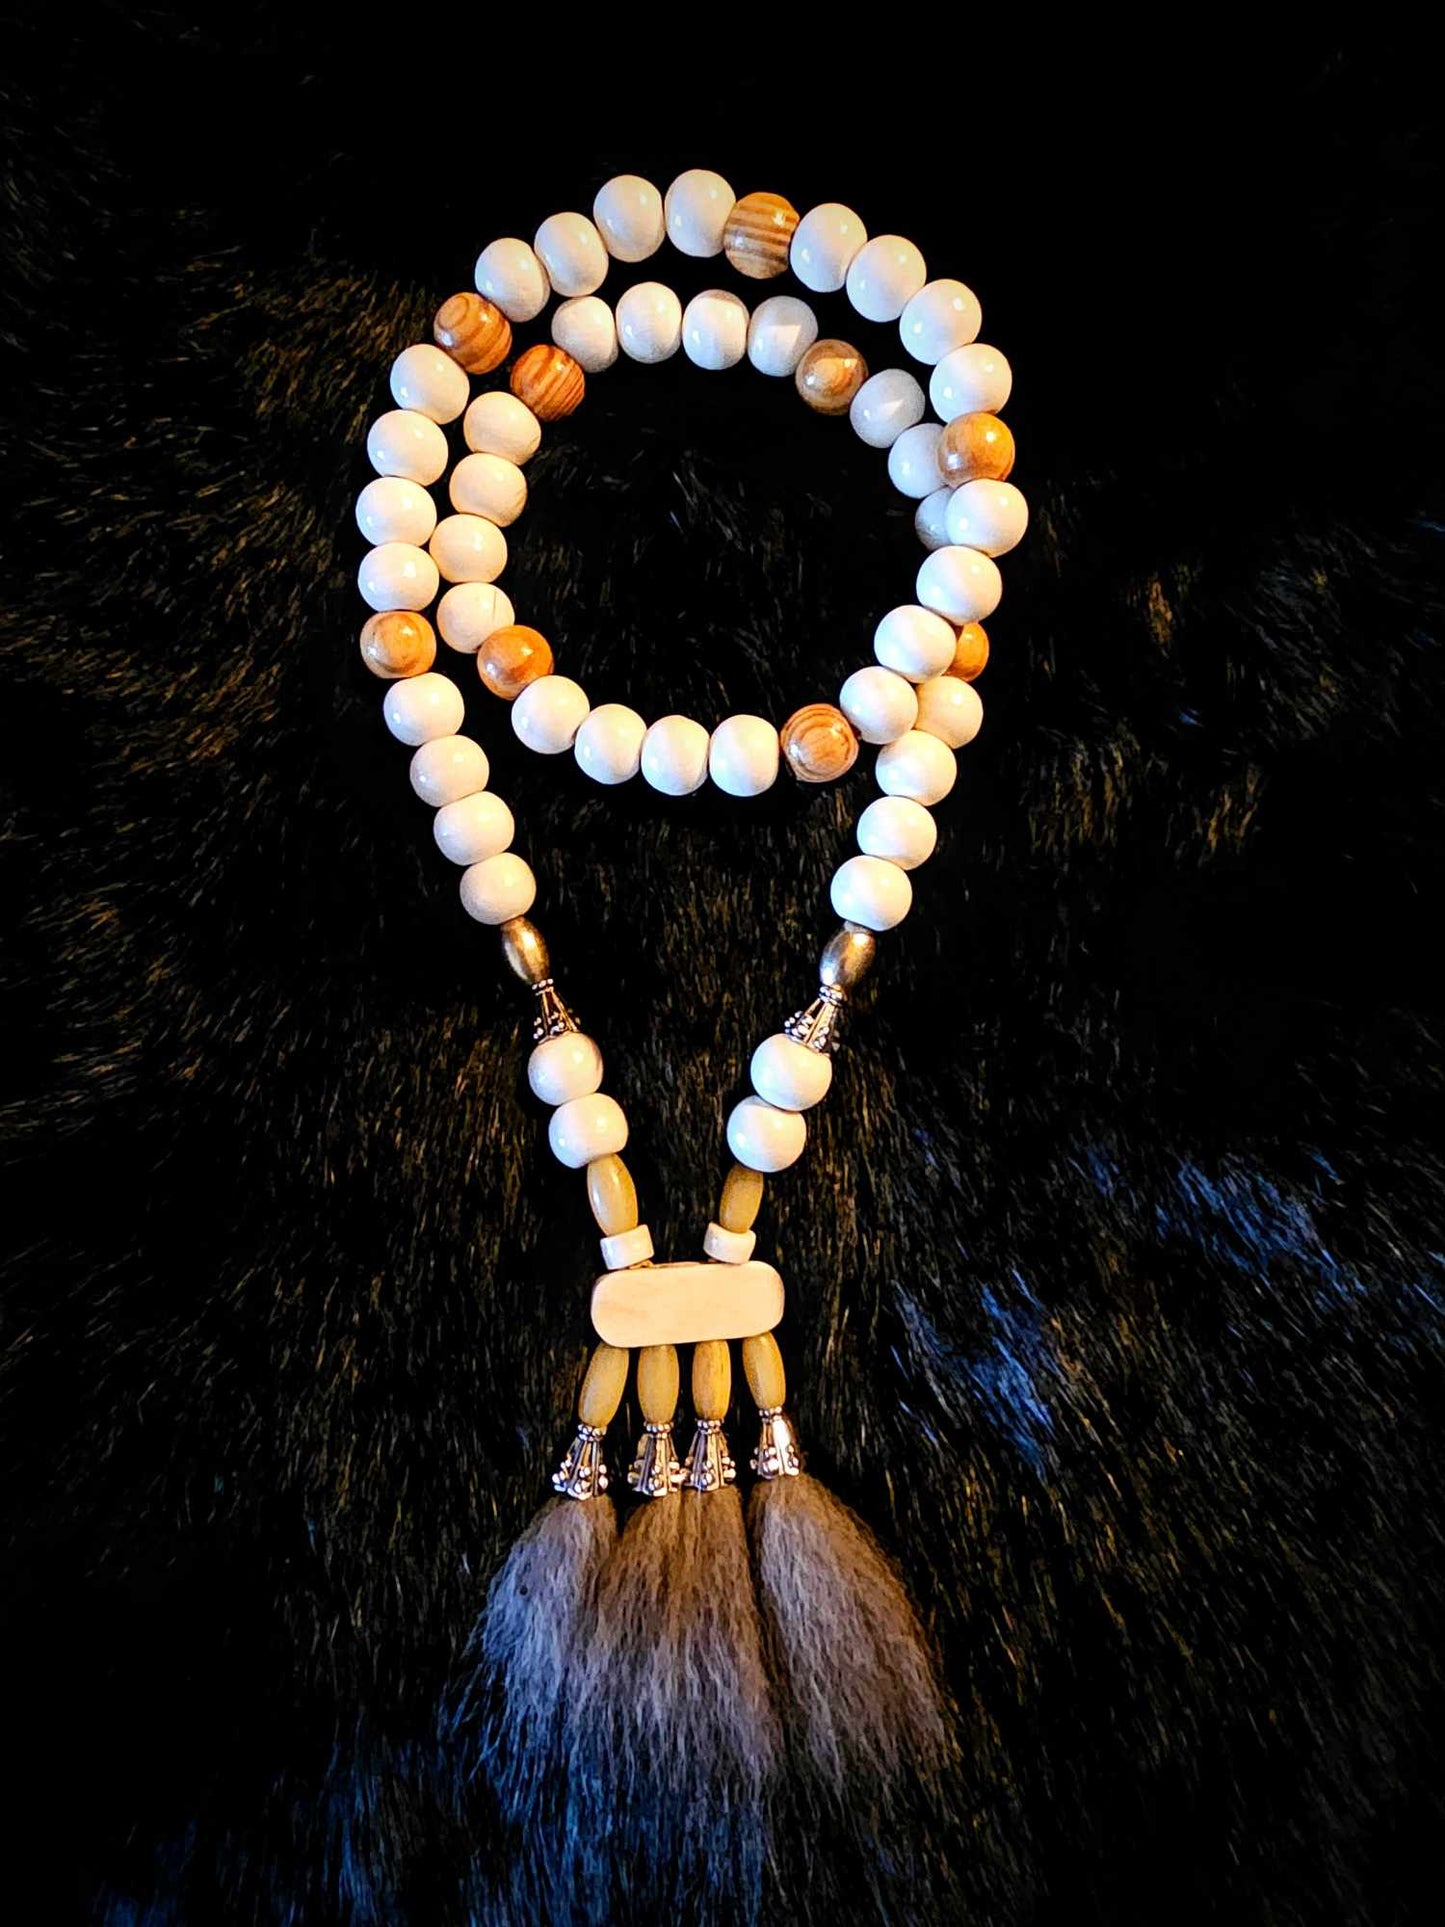 Wolf Fur Pendant with Bison, Cow, Wood, and Metal Beads